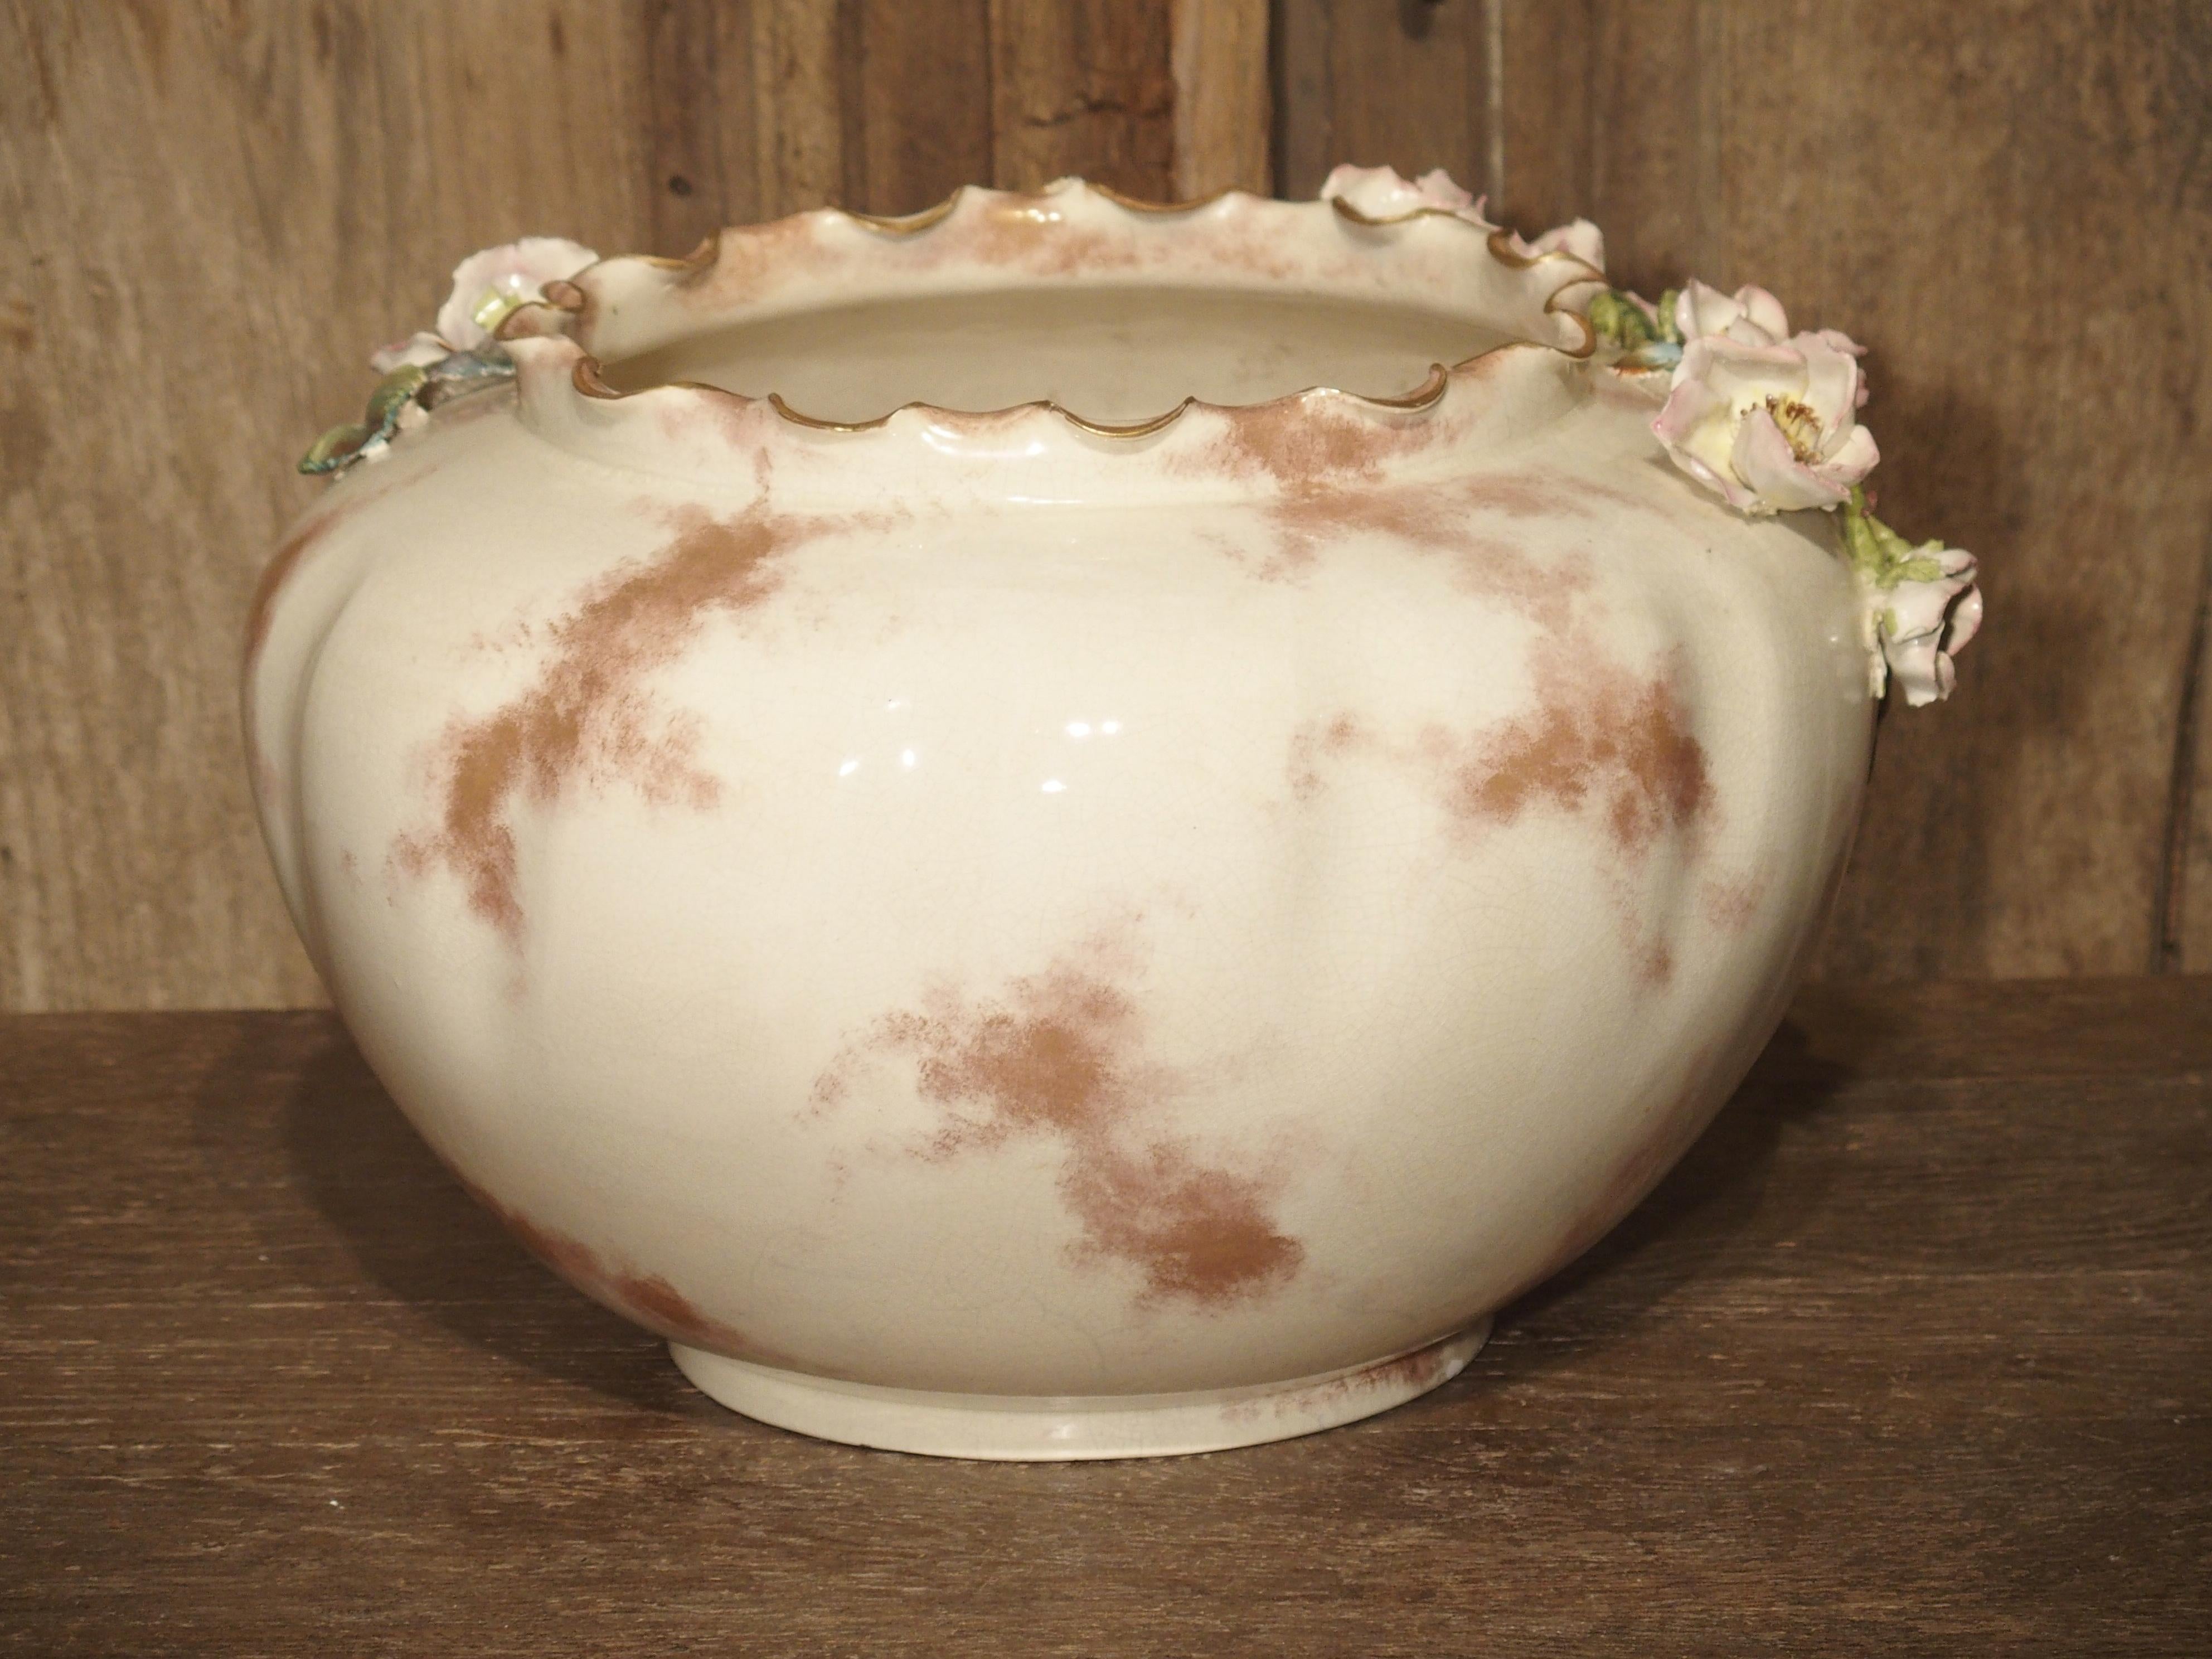 From France, this gros relief barbotine cachepot has been painted in pale pinks, greens, yellows, creams, and browns. A certain type of clay called Kaolin is used in the making of barbotine. Kaolin allowed the sculptor to form paper thin petals and